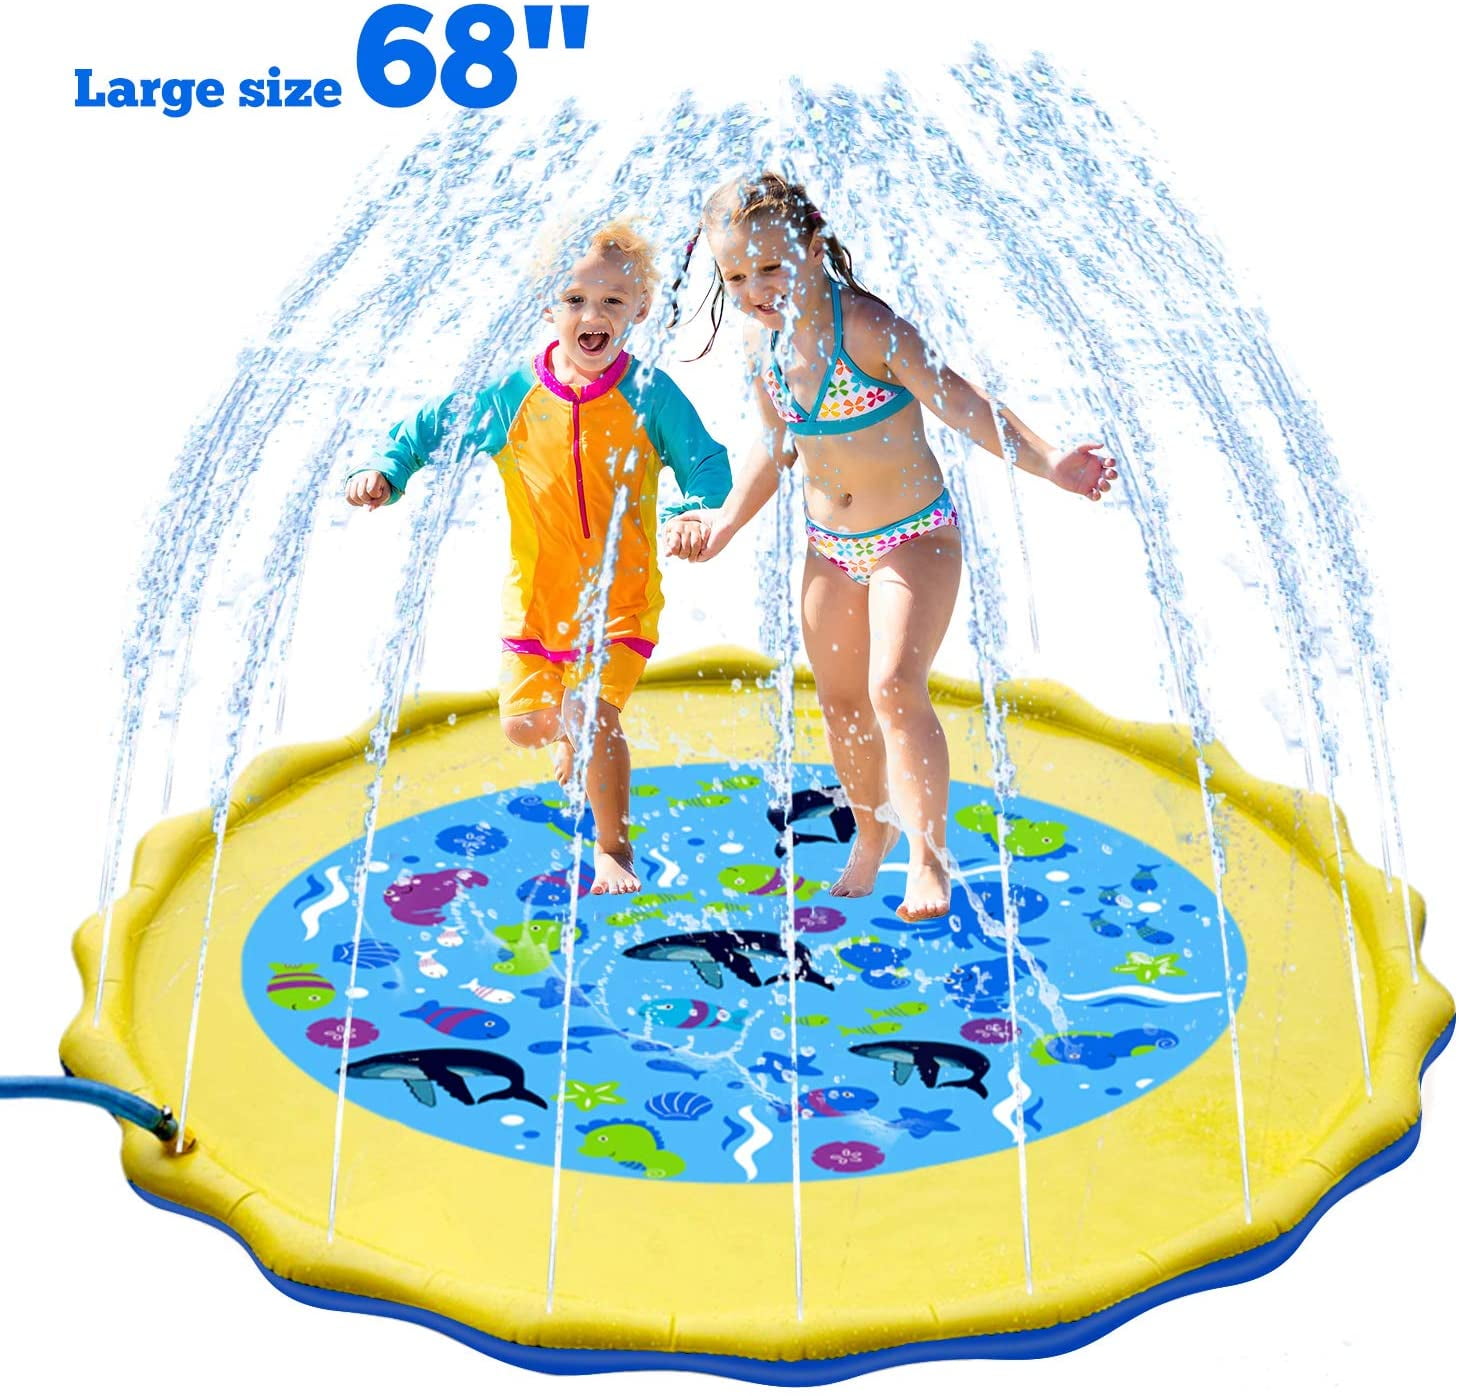 Water Play Mat 68 Sprinkle and Splash Play Mat Toy Perfect Inflatable Outdoor Sprinkler pad for Children Infants and Toddlers 2019 All New Summer Water Toys 68 INCH 